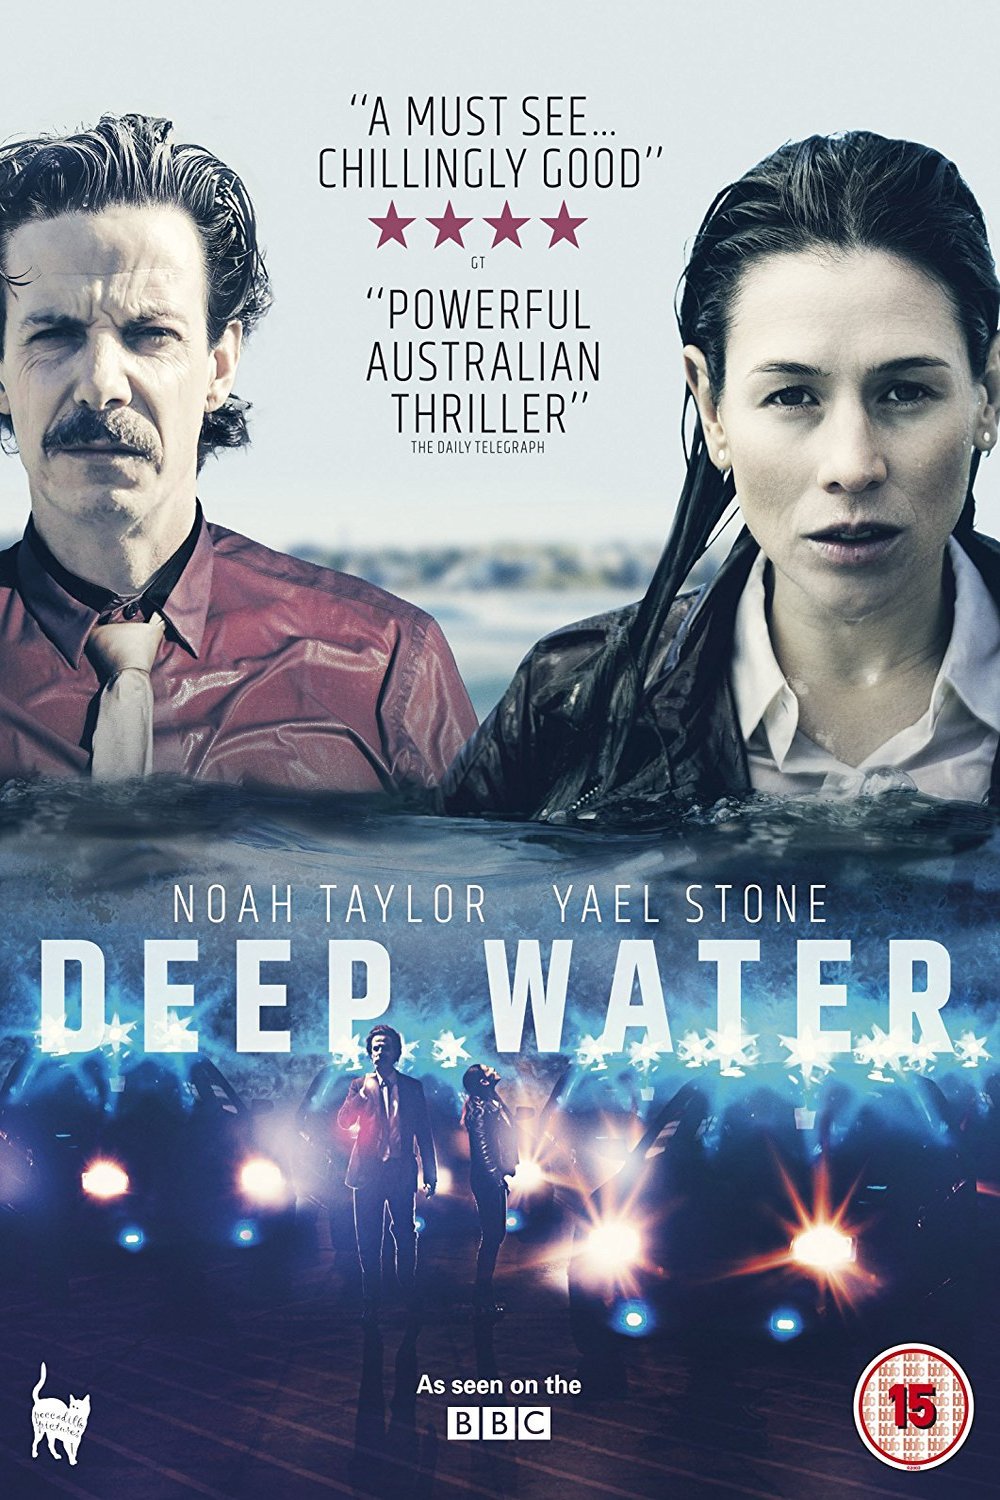 Poster of the movie Deep Water